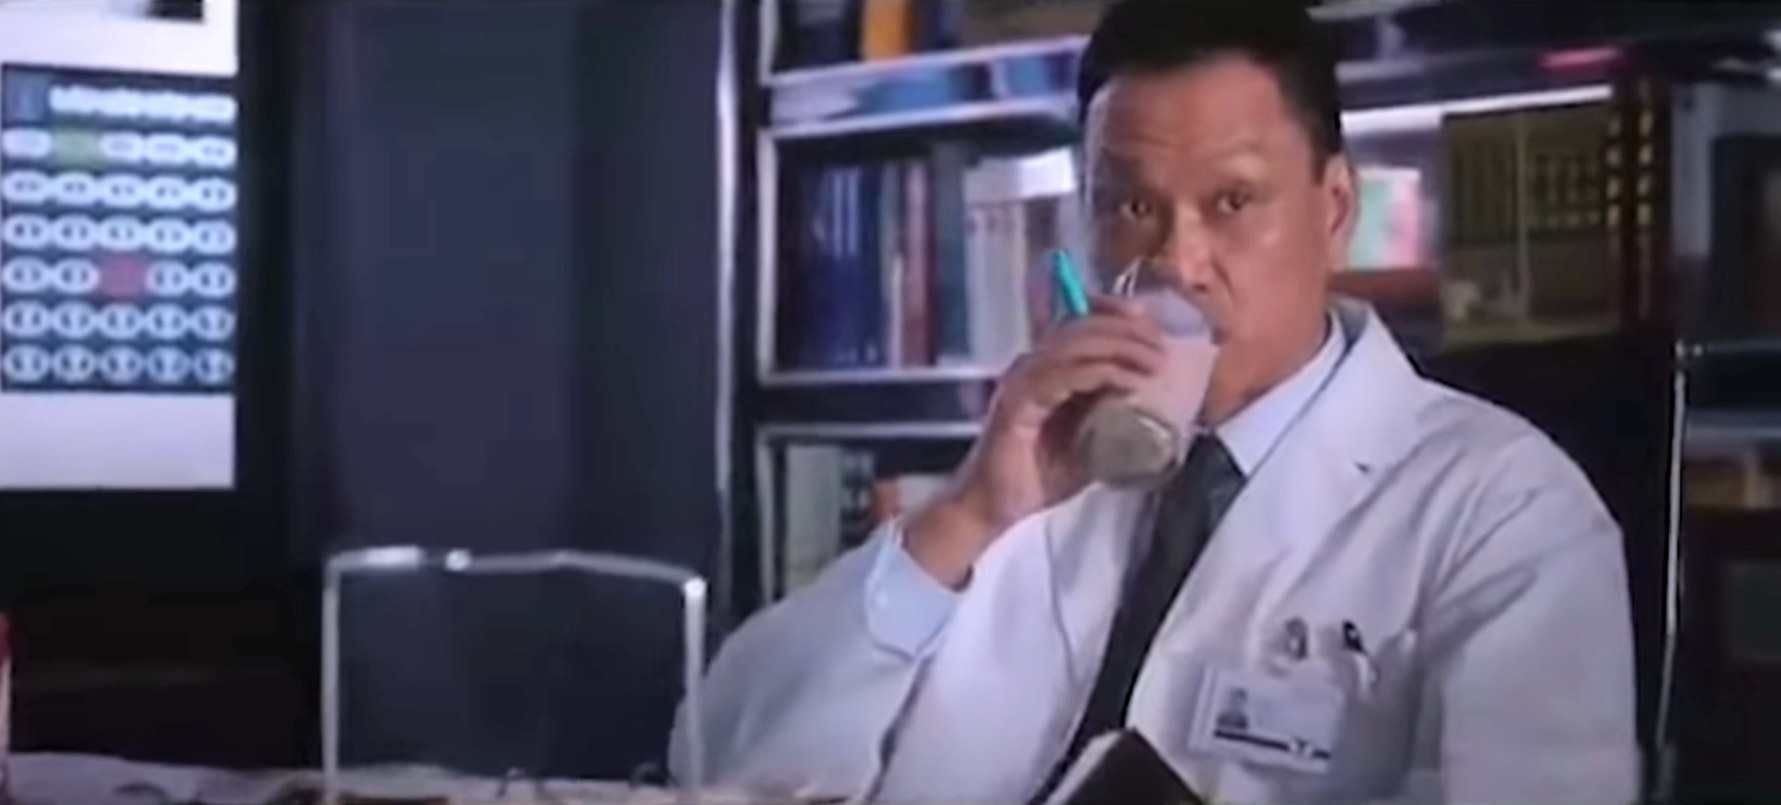 The character Dr Wu played by Wang Xueqi takes a sip from a drink in Iron Man 3